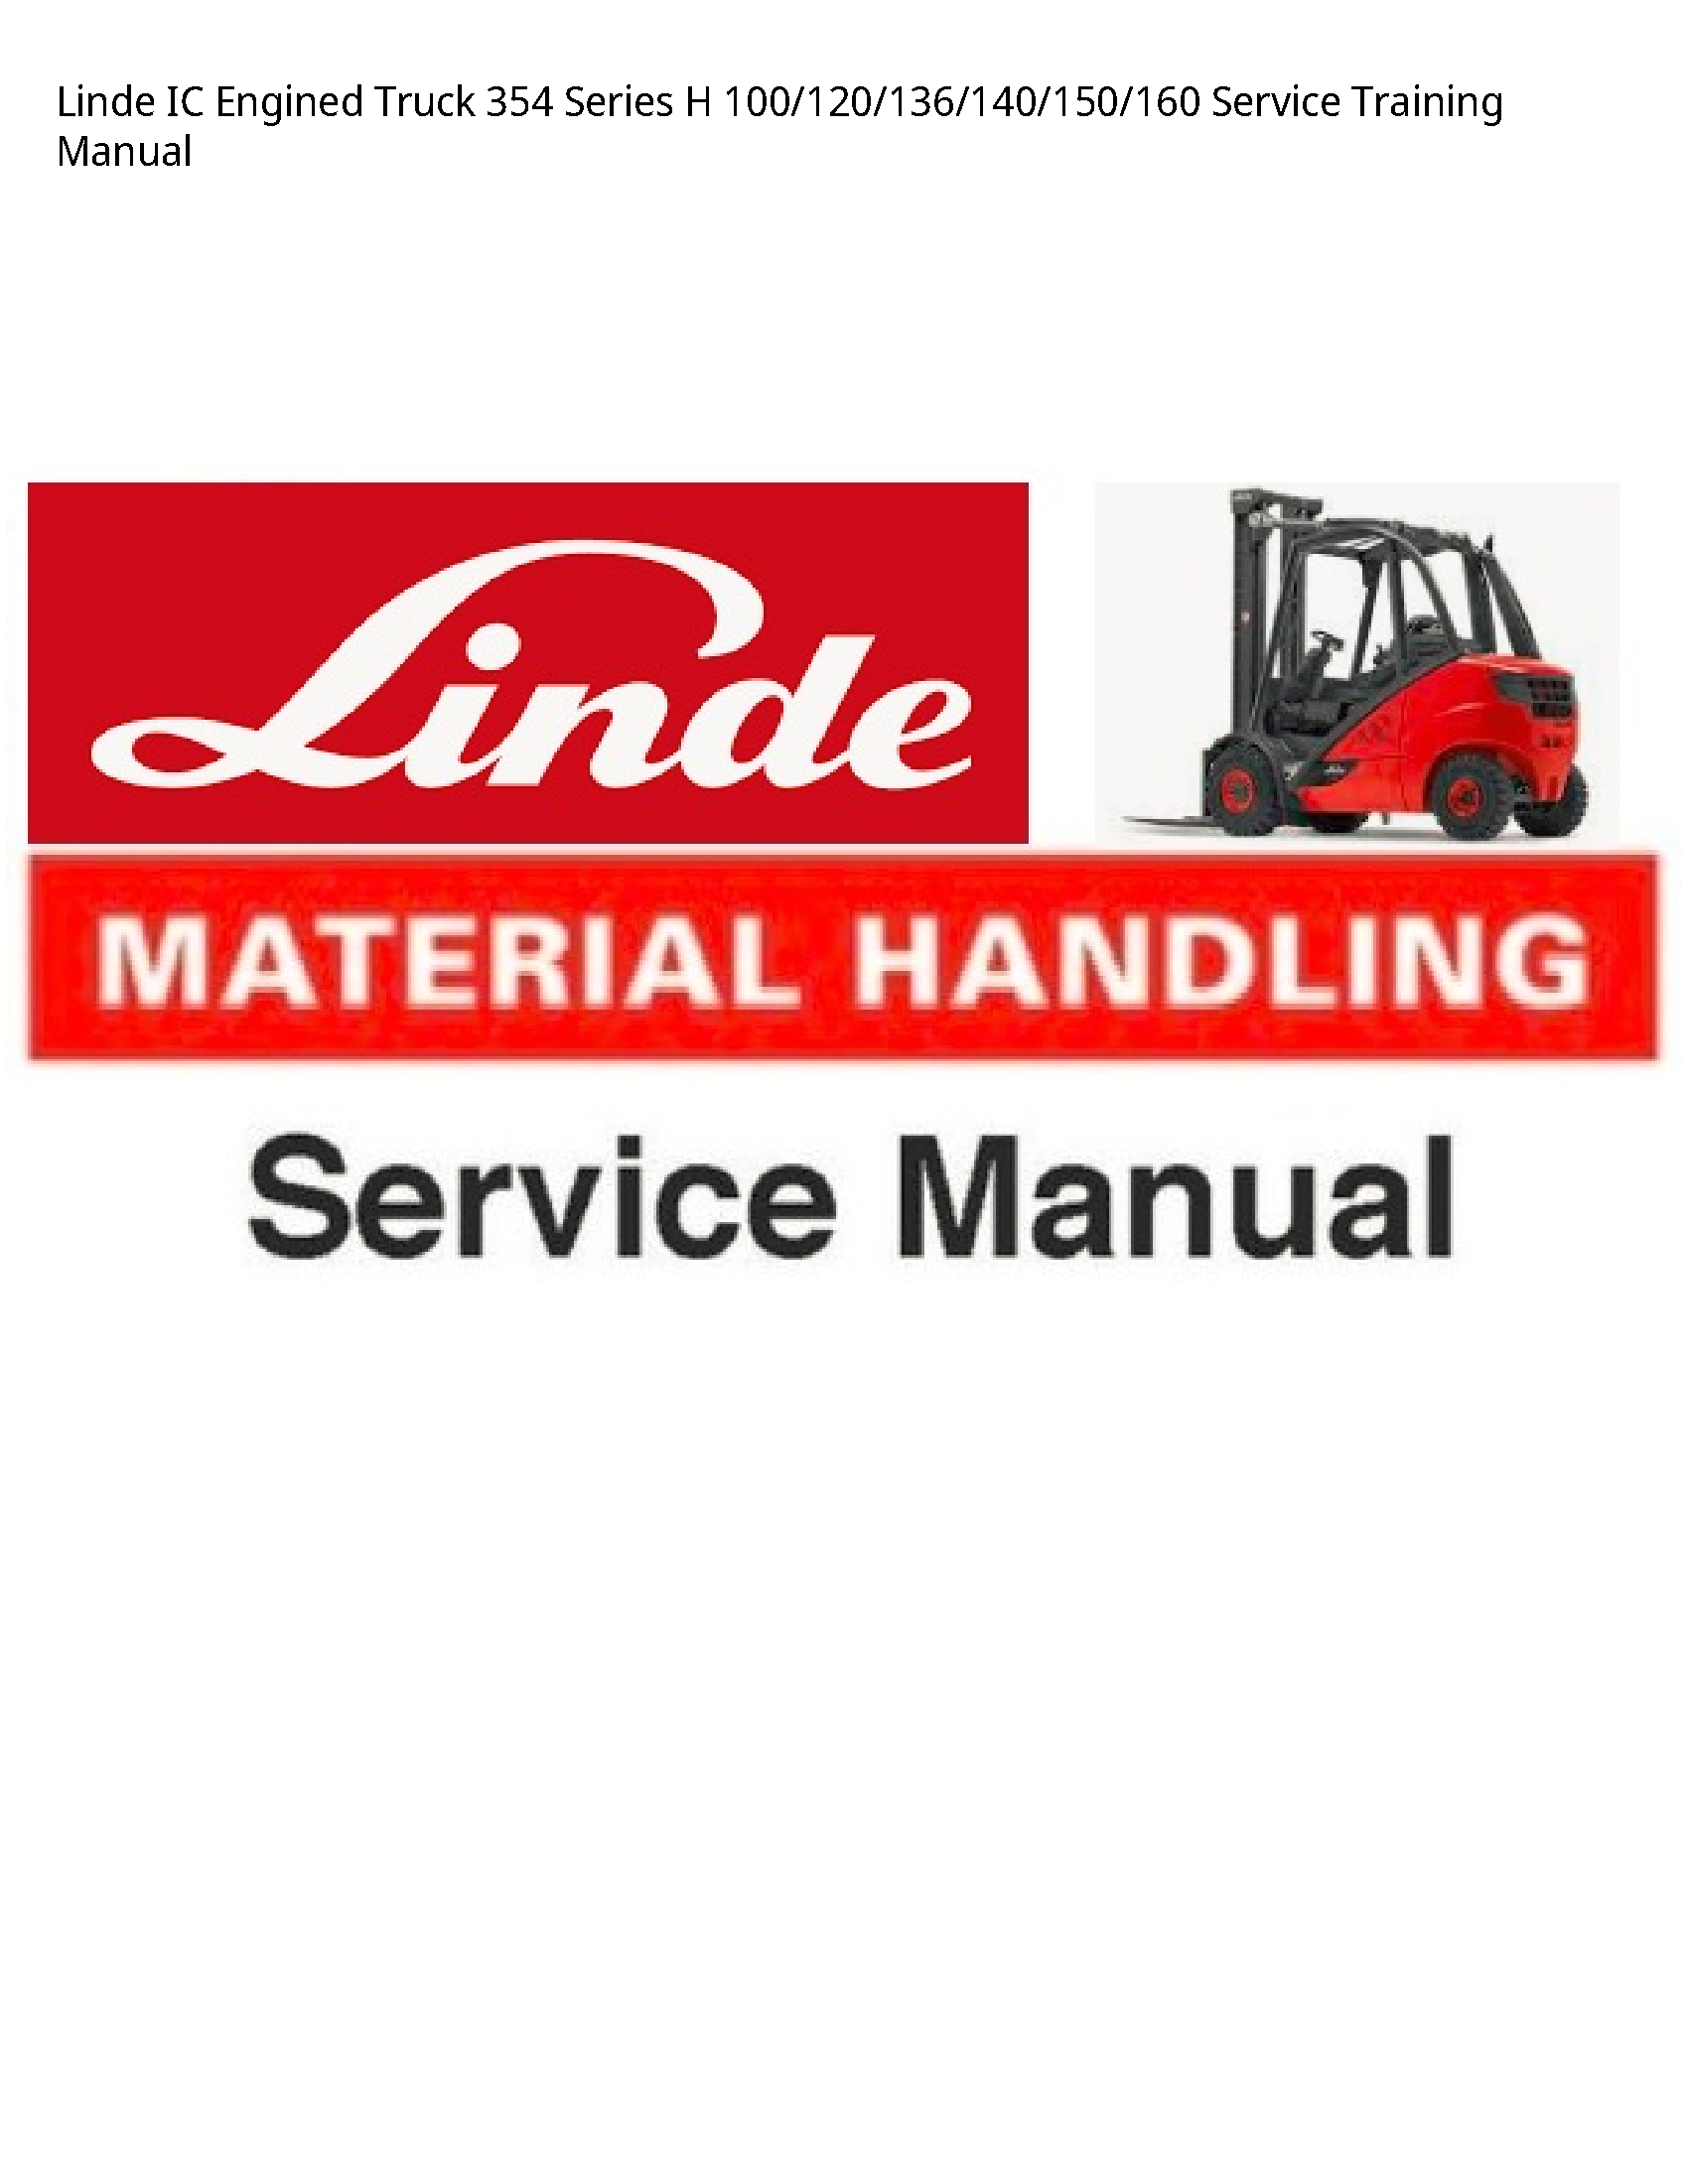 Linde 354 IC Engined Truck Series Service Training manual